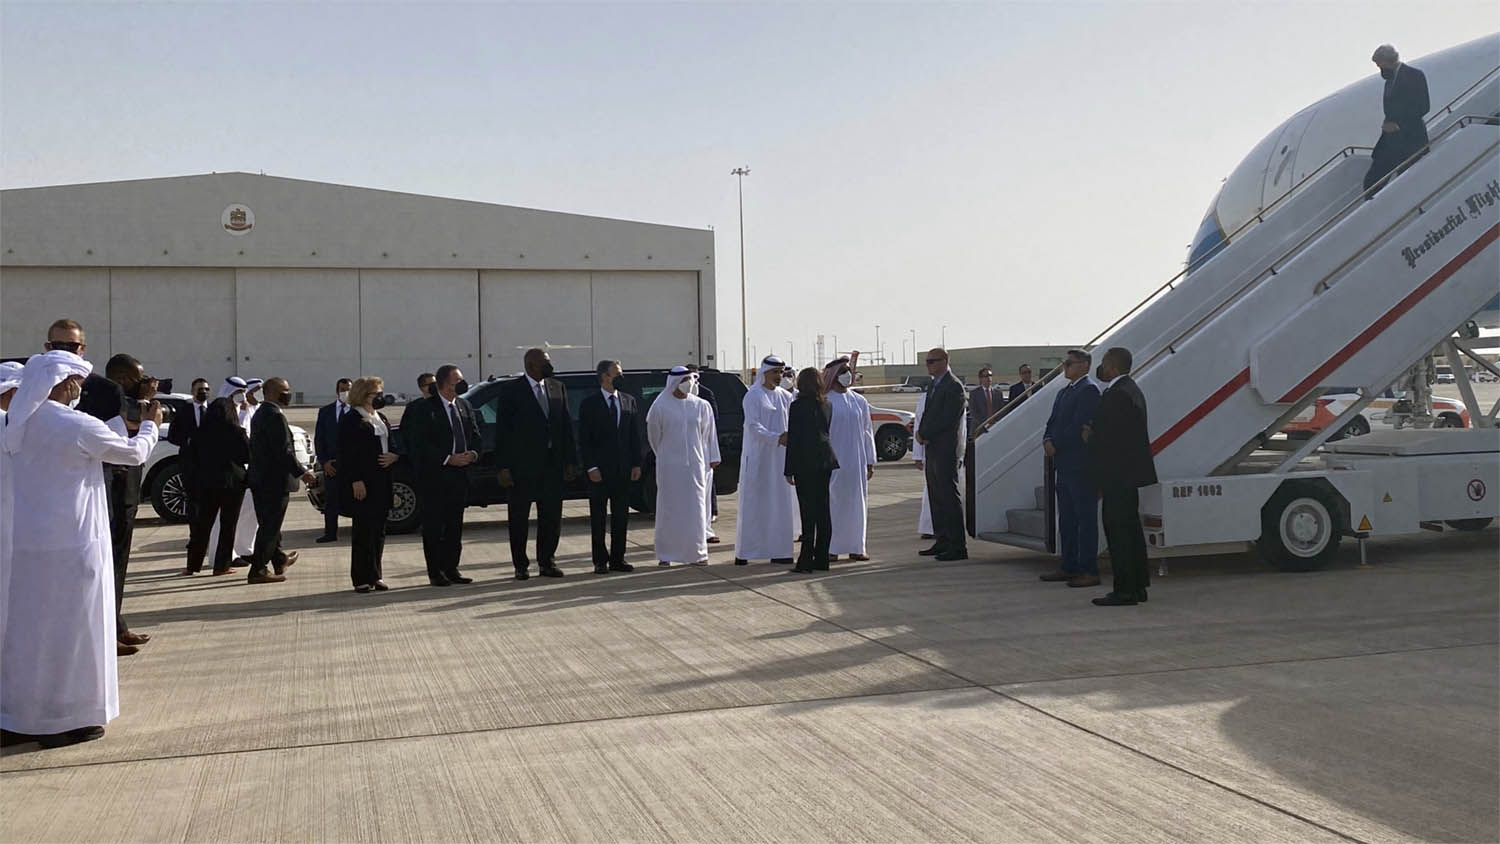 Harris received by UAE officials upon the US delegation's arrival in Abu Dhabi